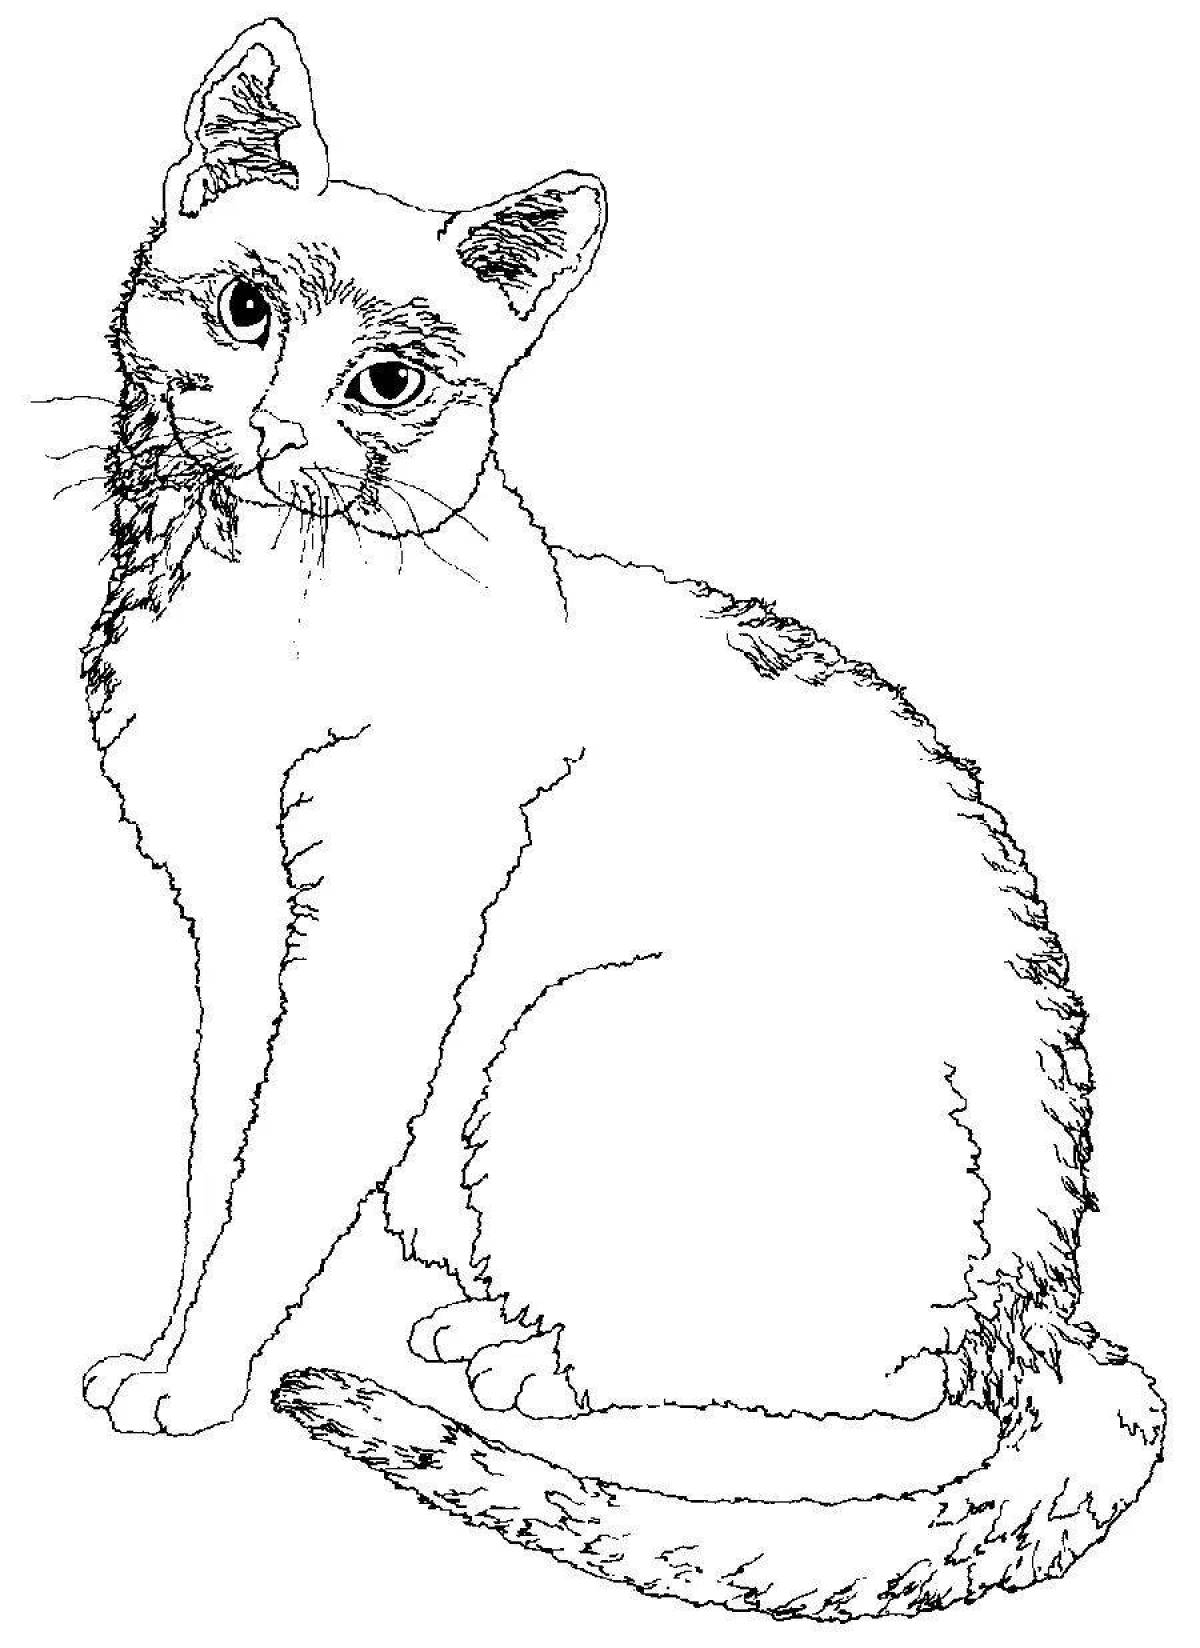 Coloring book playful siamese cat